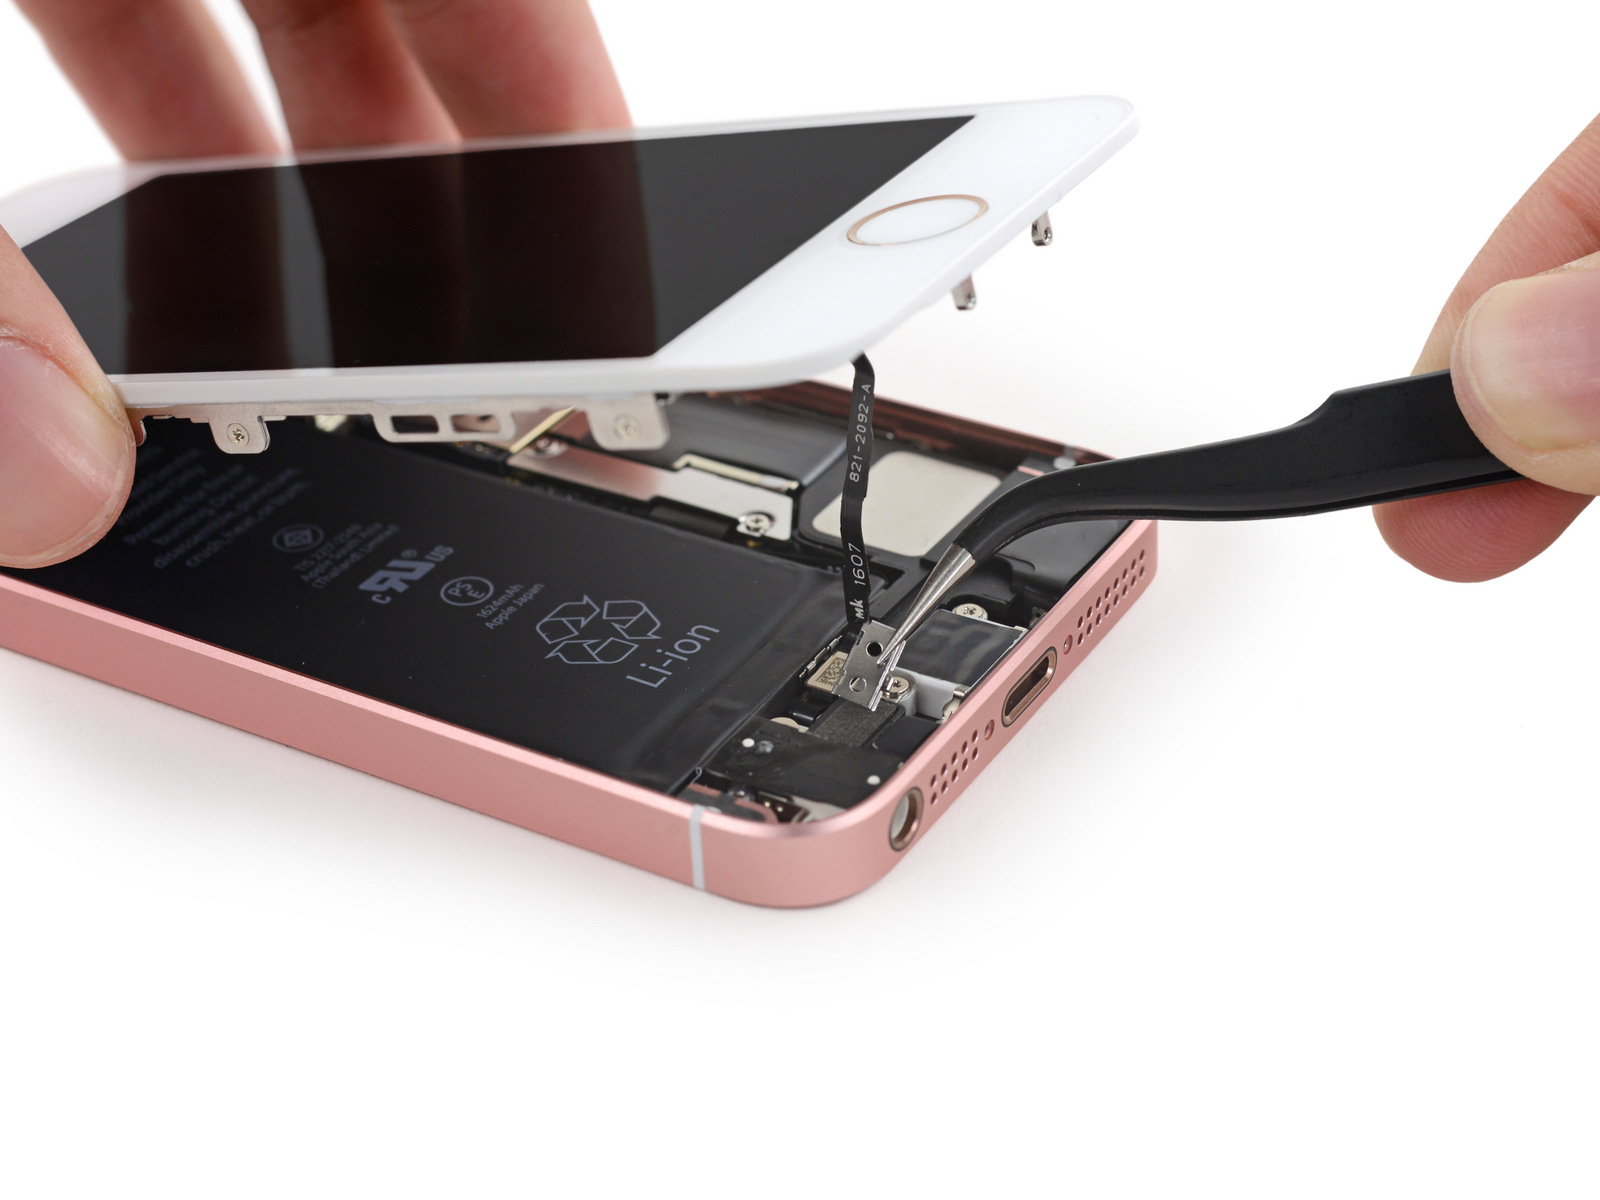 iFixit: The iPhone SE and iPhone 5S share many identical parts | The 